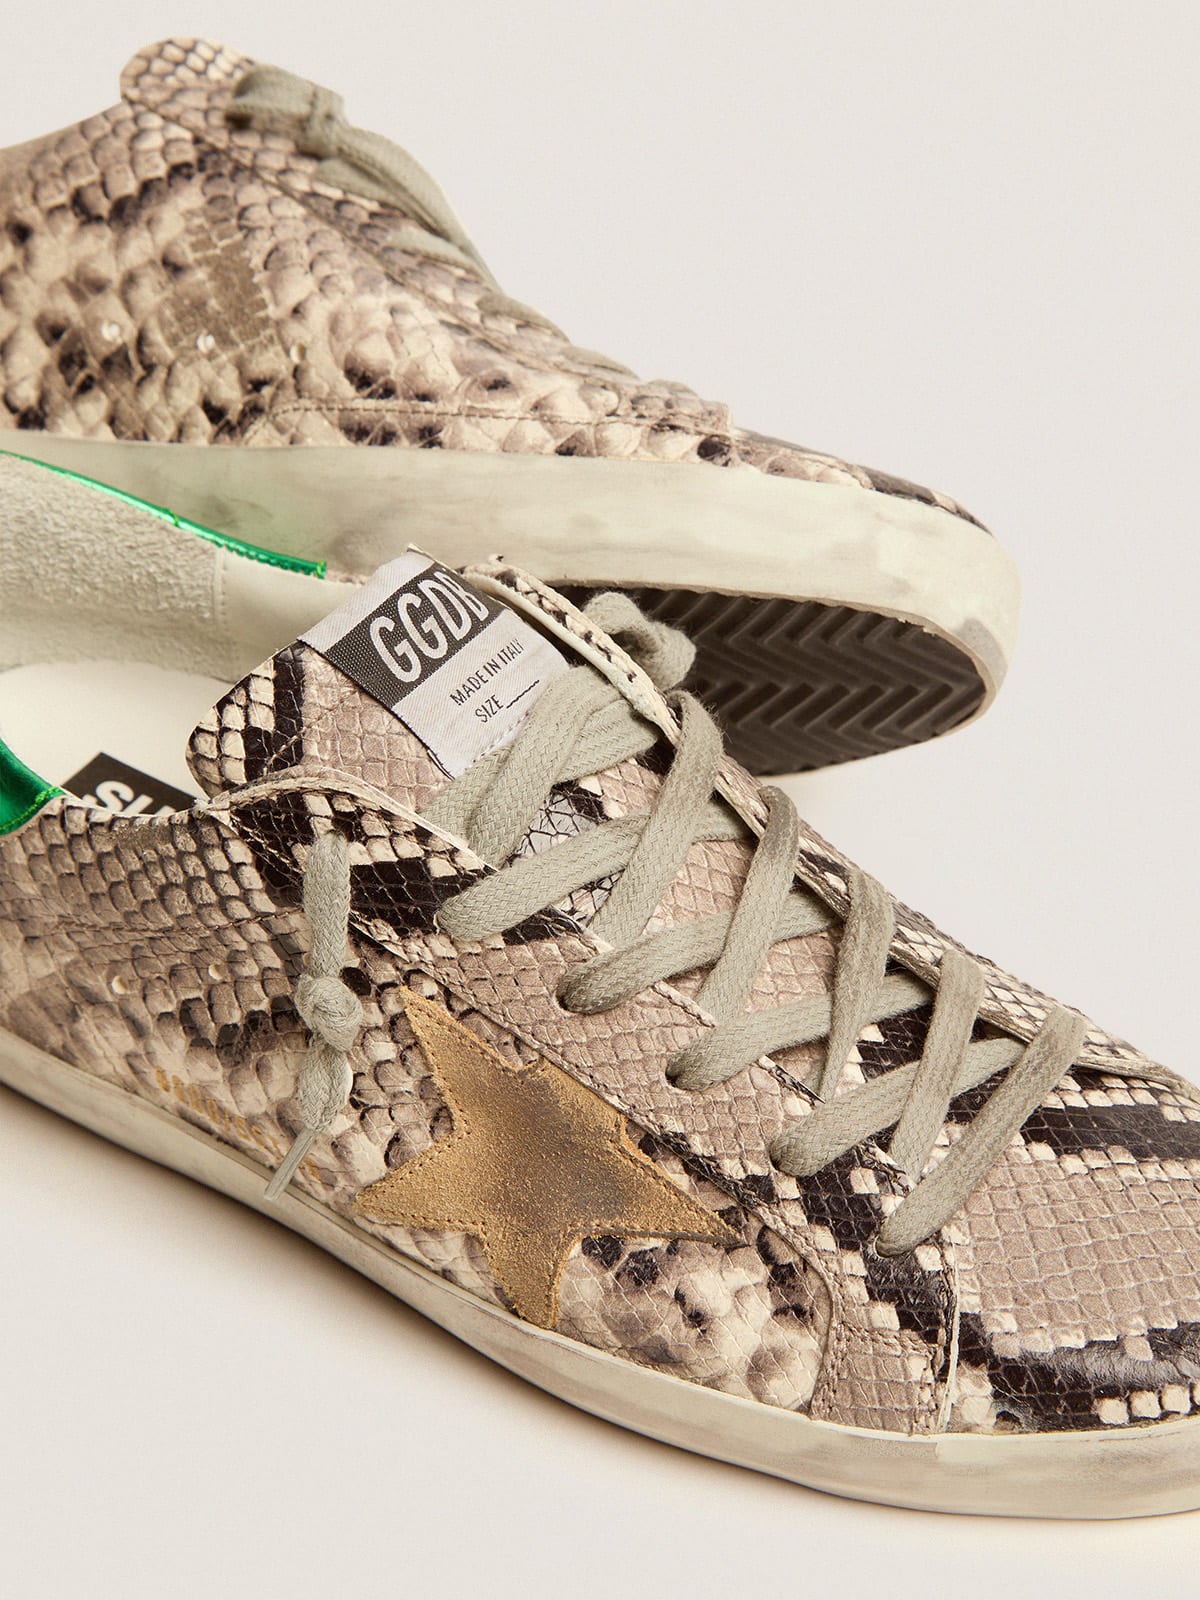 Super-Star LTD sneakers with snake-print leather upper and green laminated  leather heel tab | Golden Goose